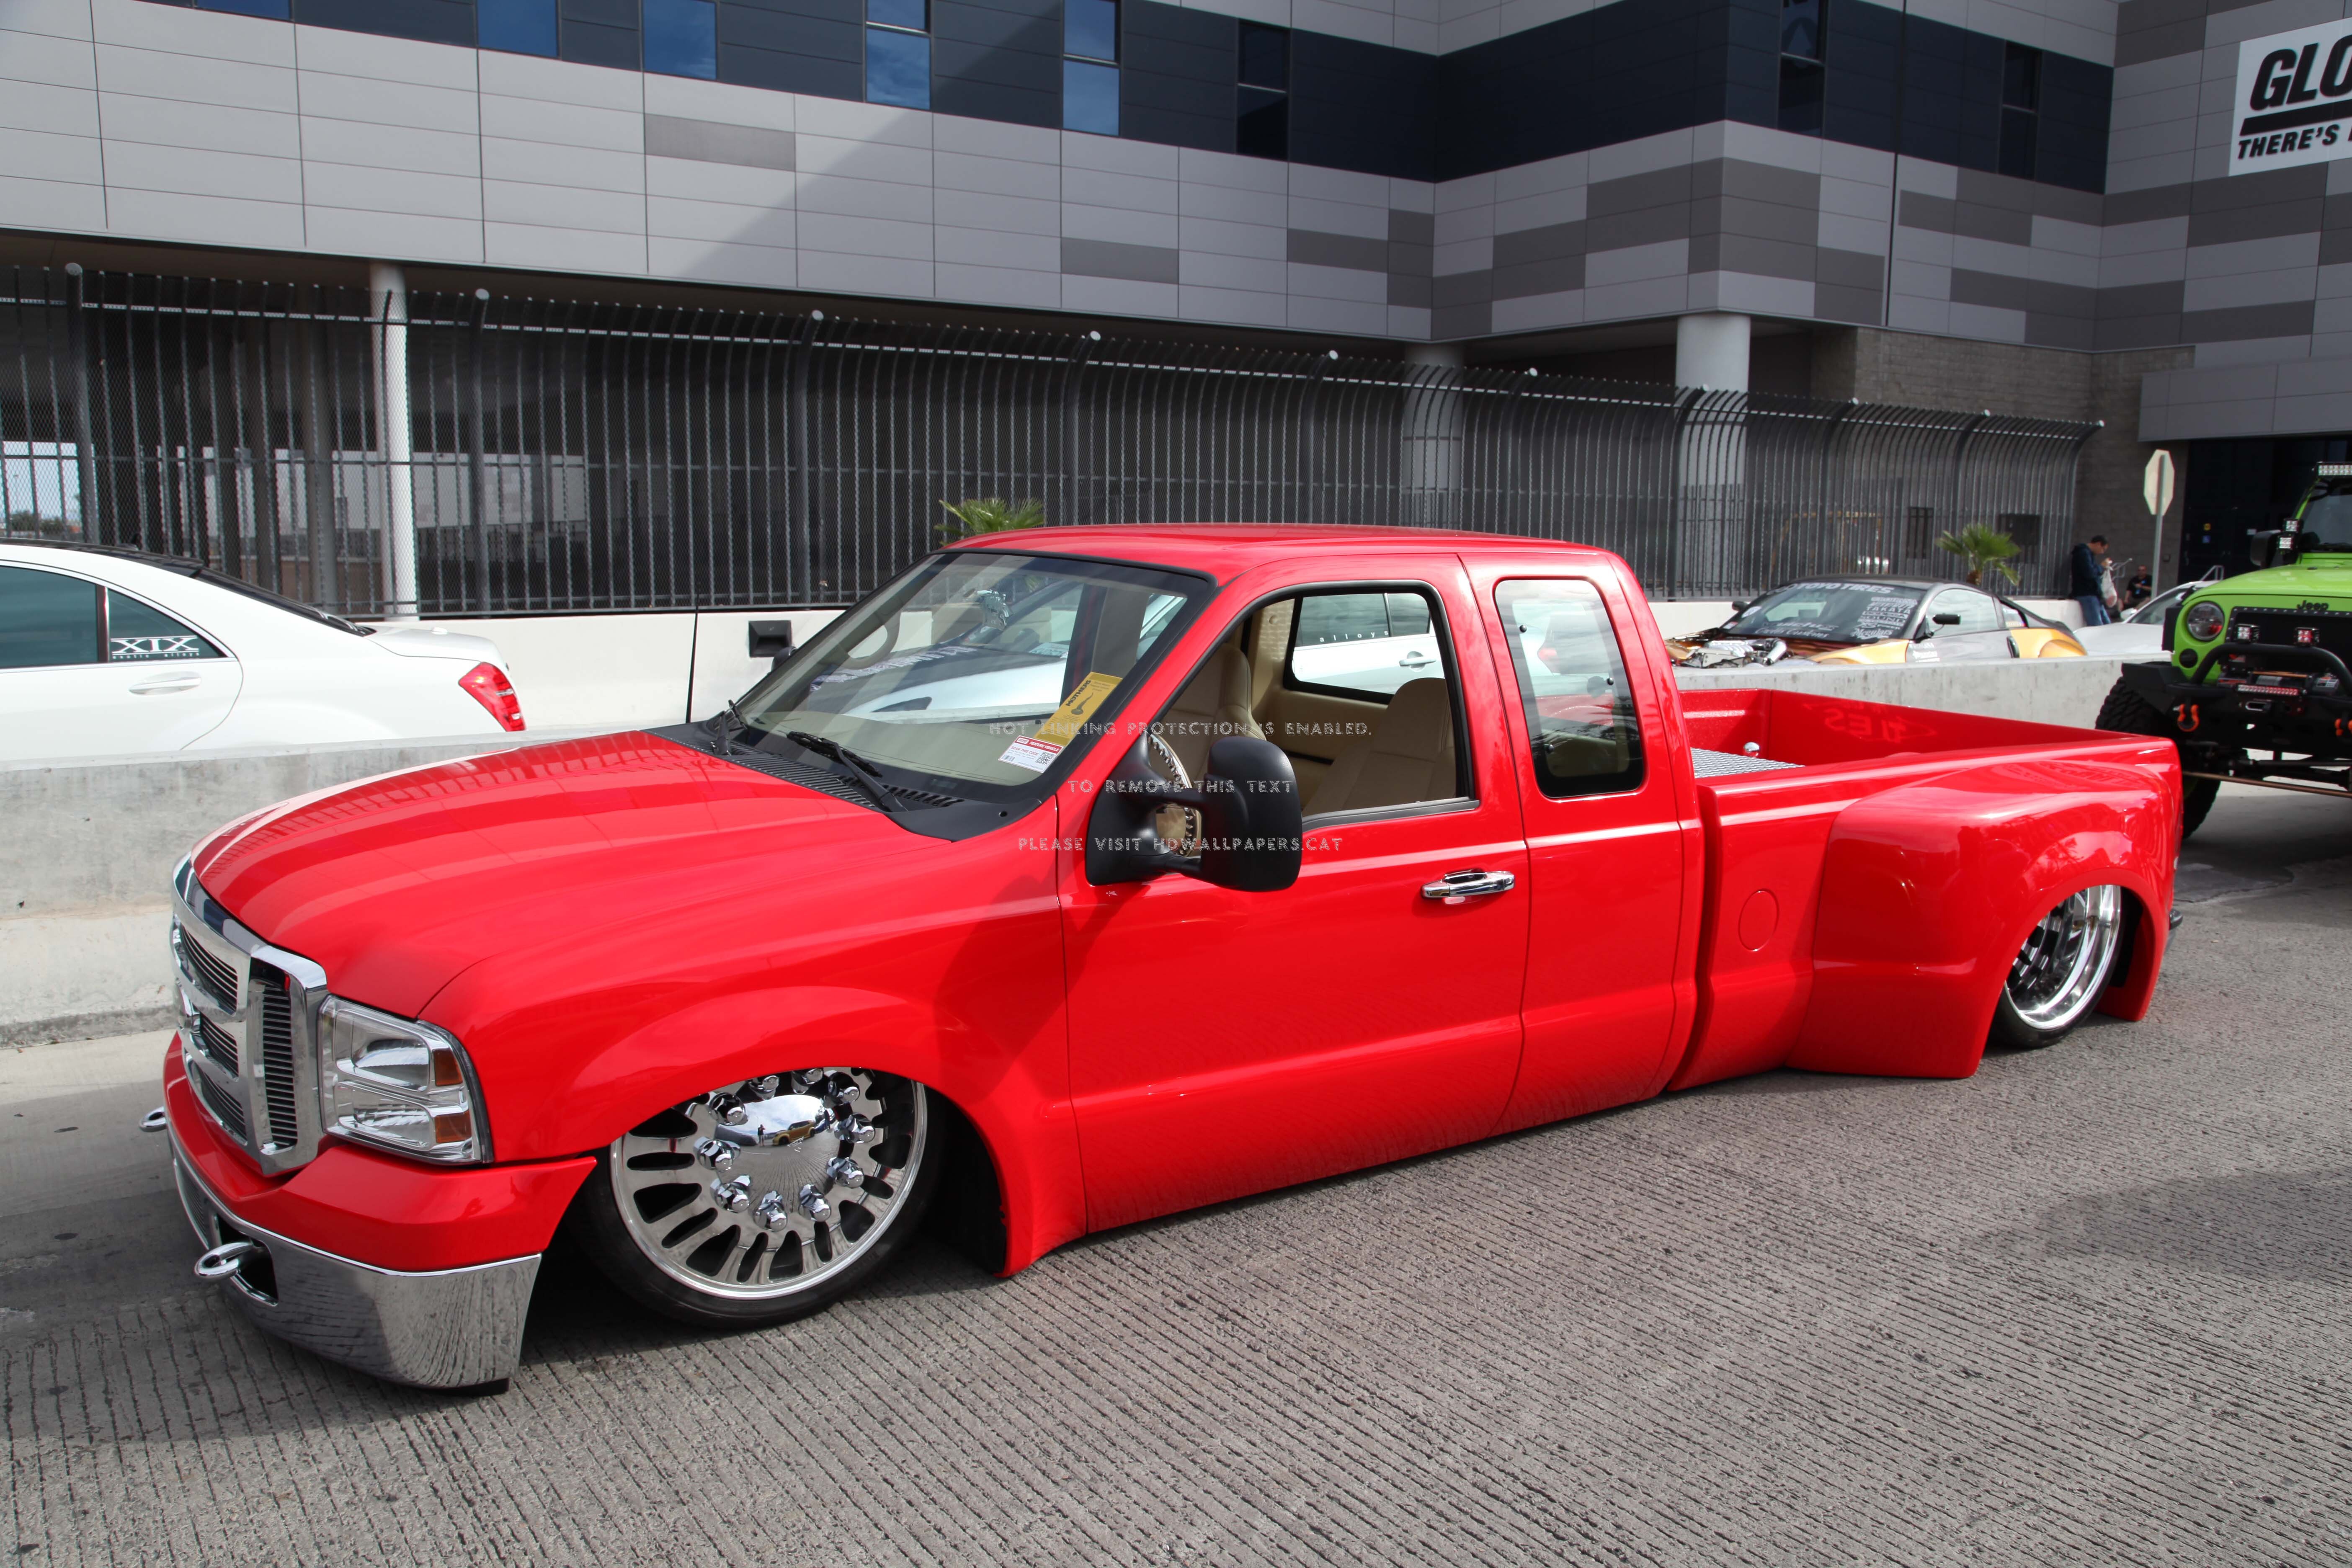 Ford F 350 Slammed Red Dually Truck Cars